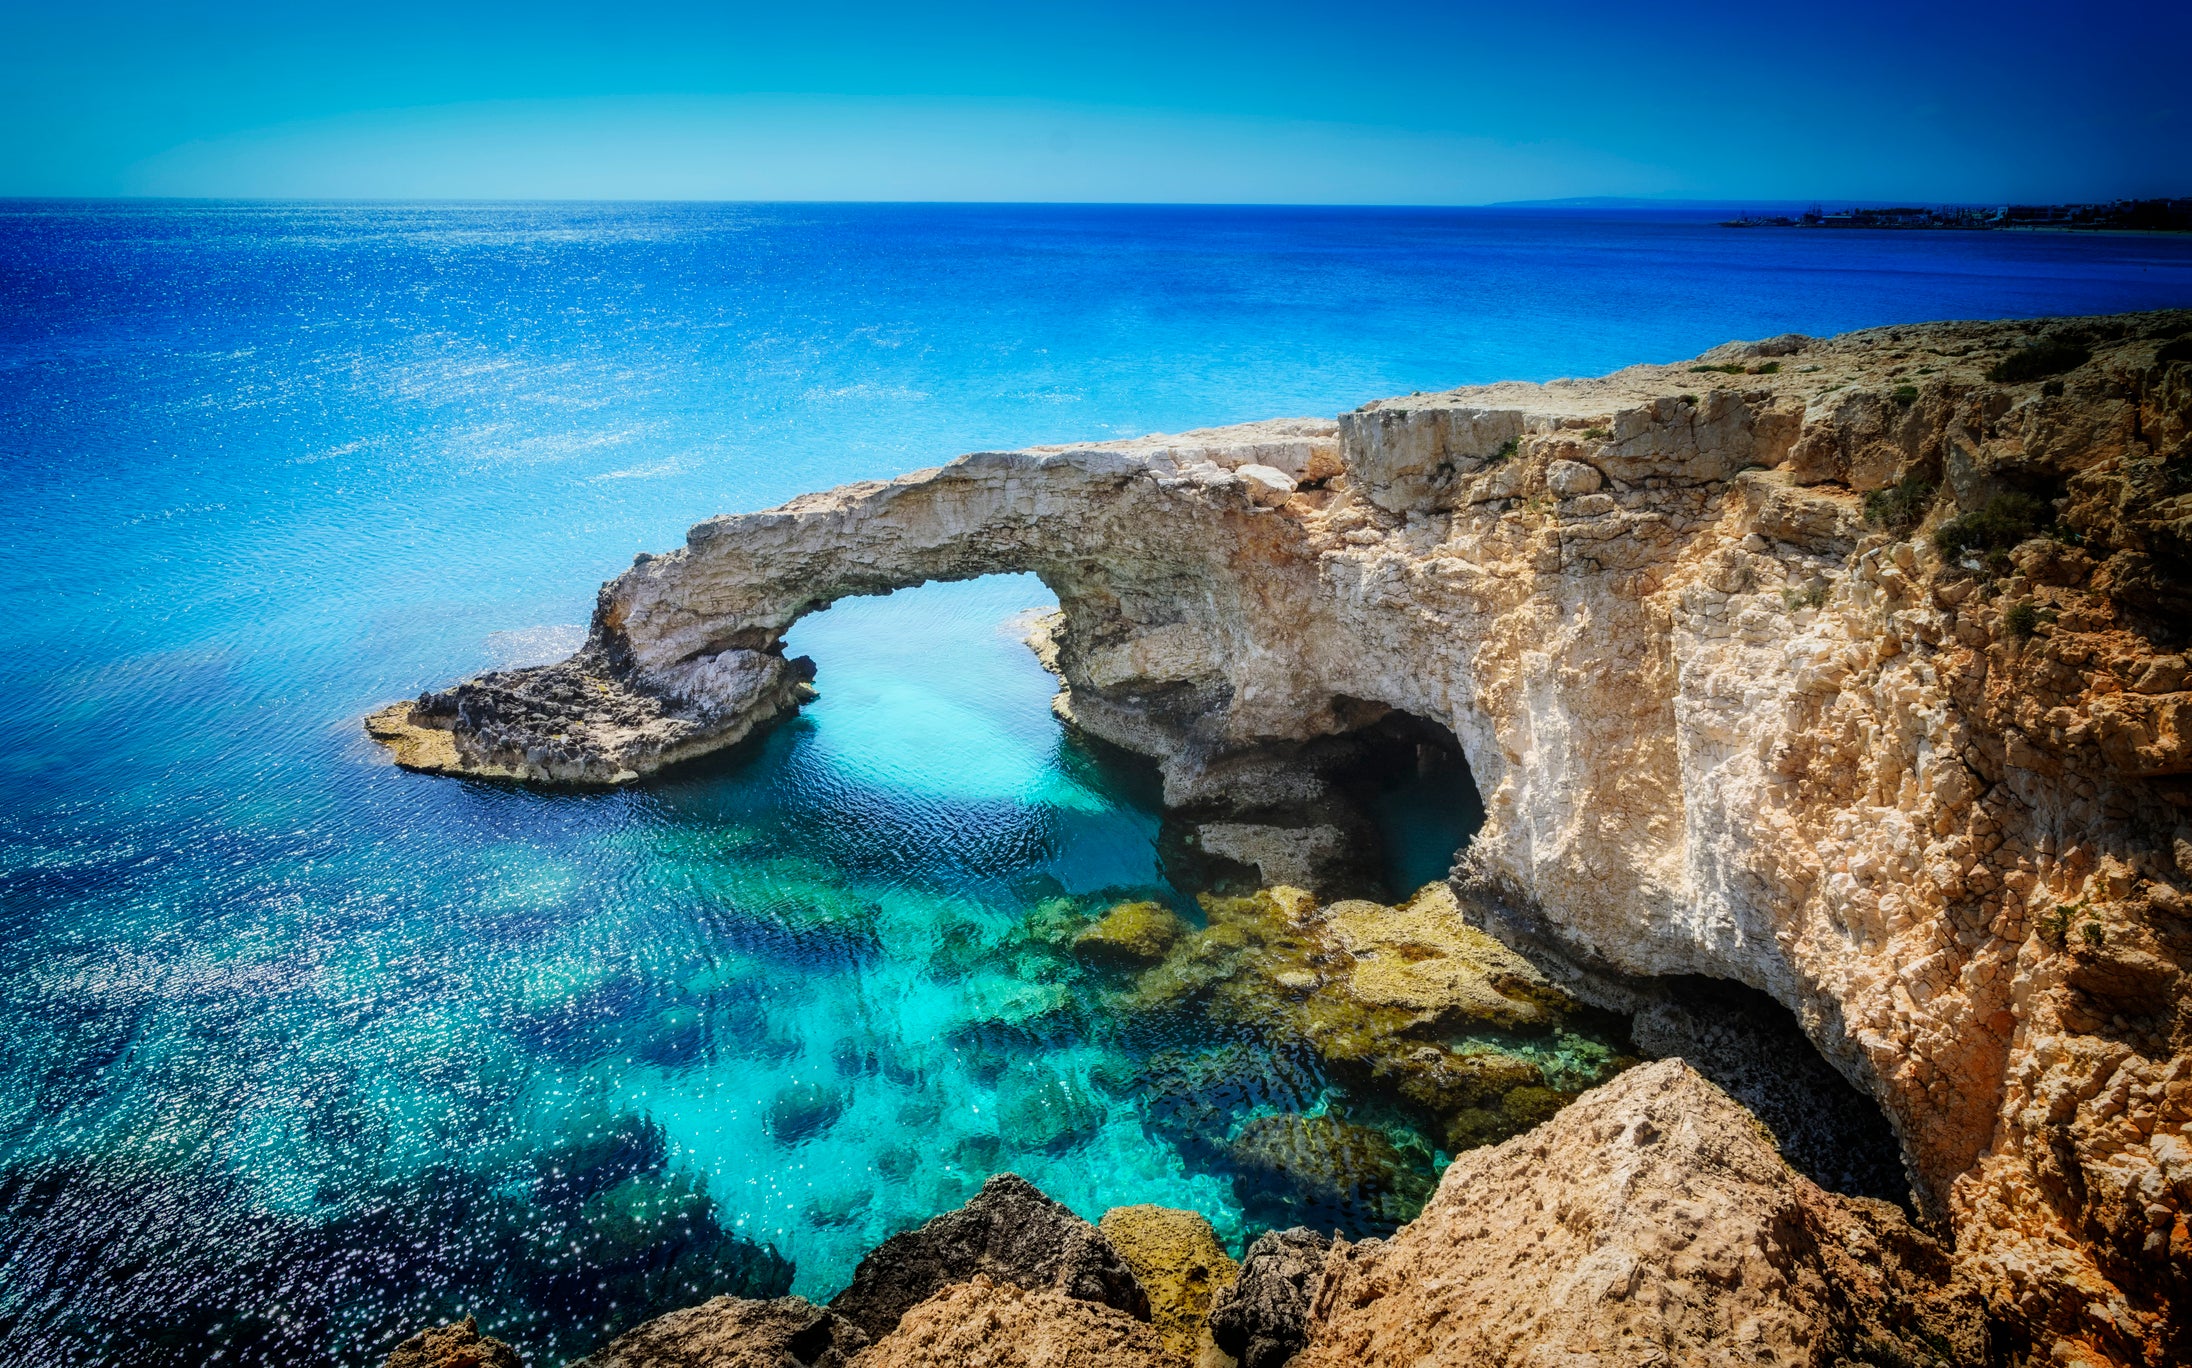 Cyprus is currently on the ‘rest of the world’ list